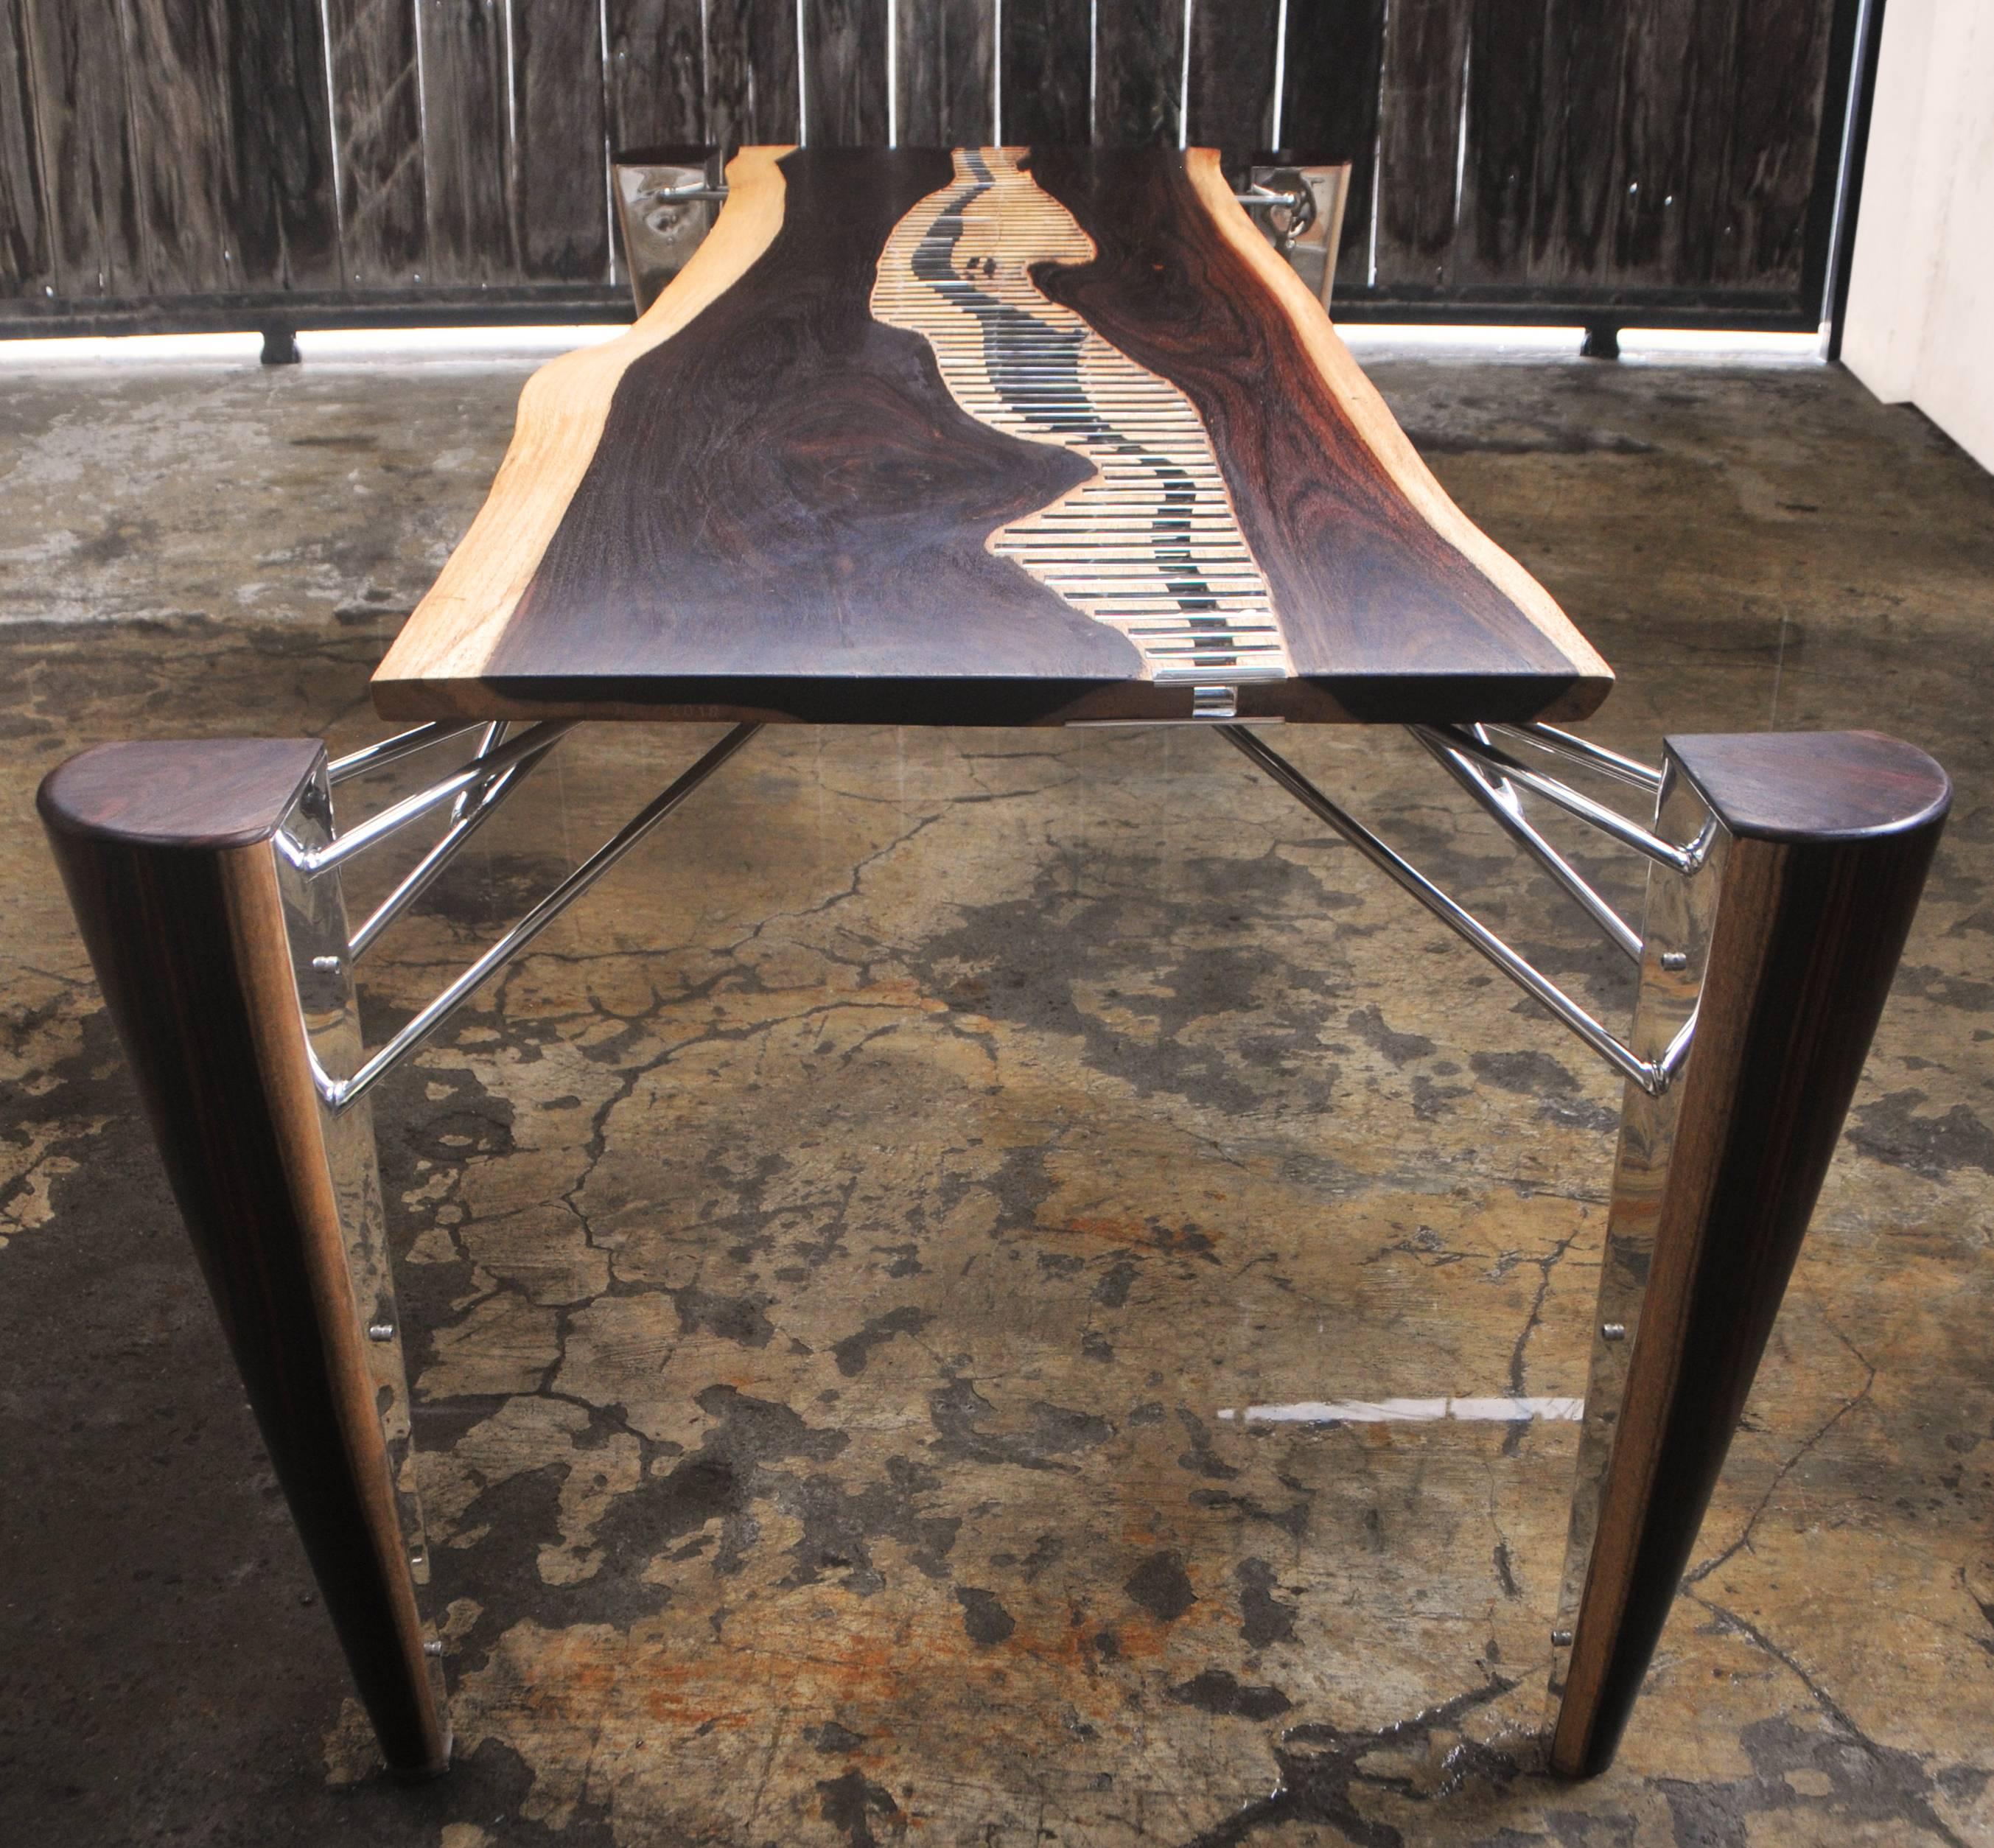 Organic Modern Mahakam Table One of a Kind Made of Rosewood and Mirror Polished Stainless Steel